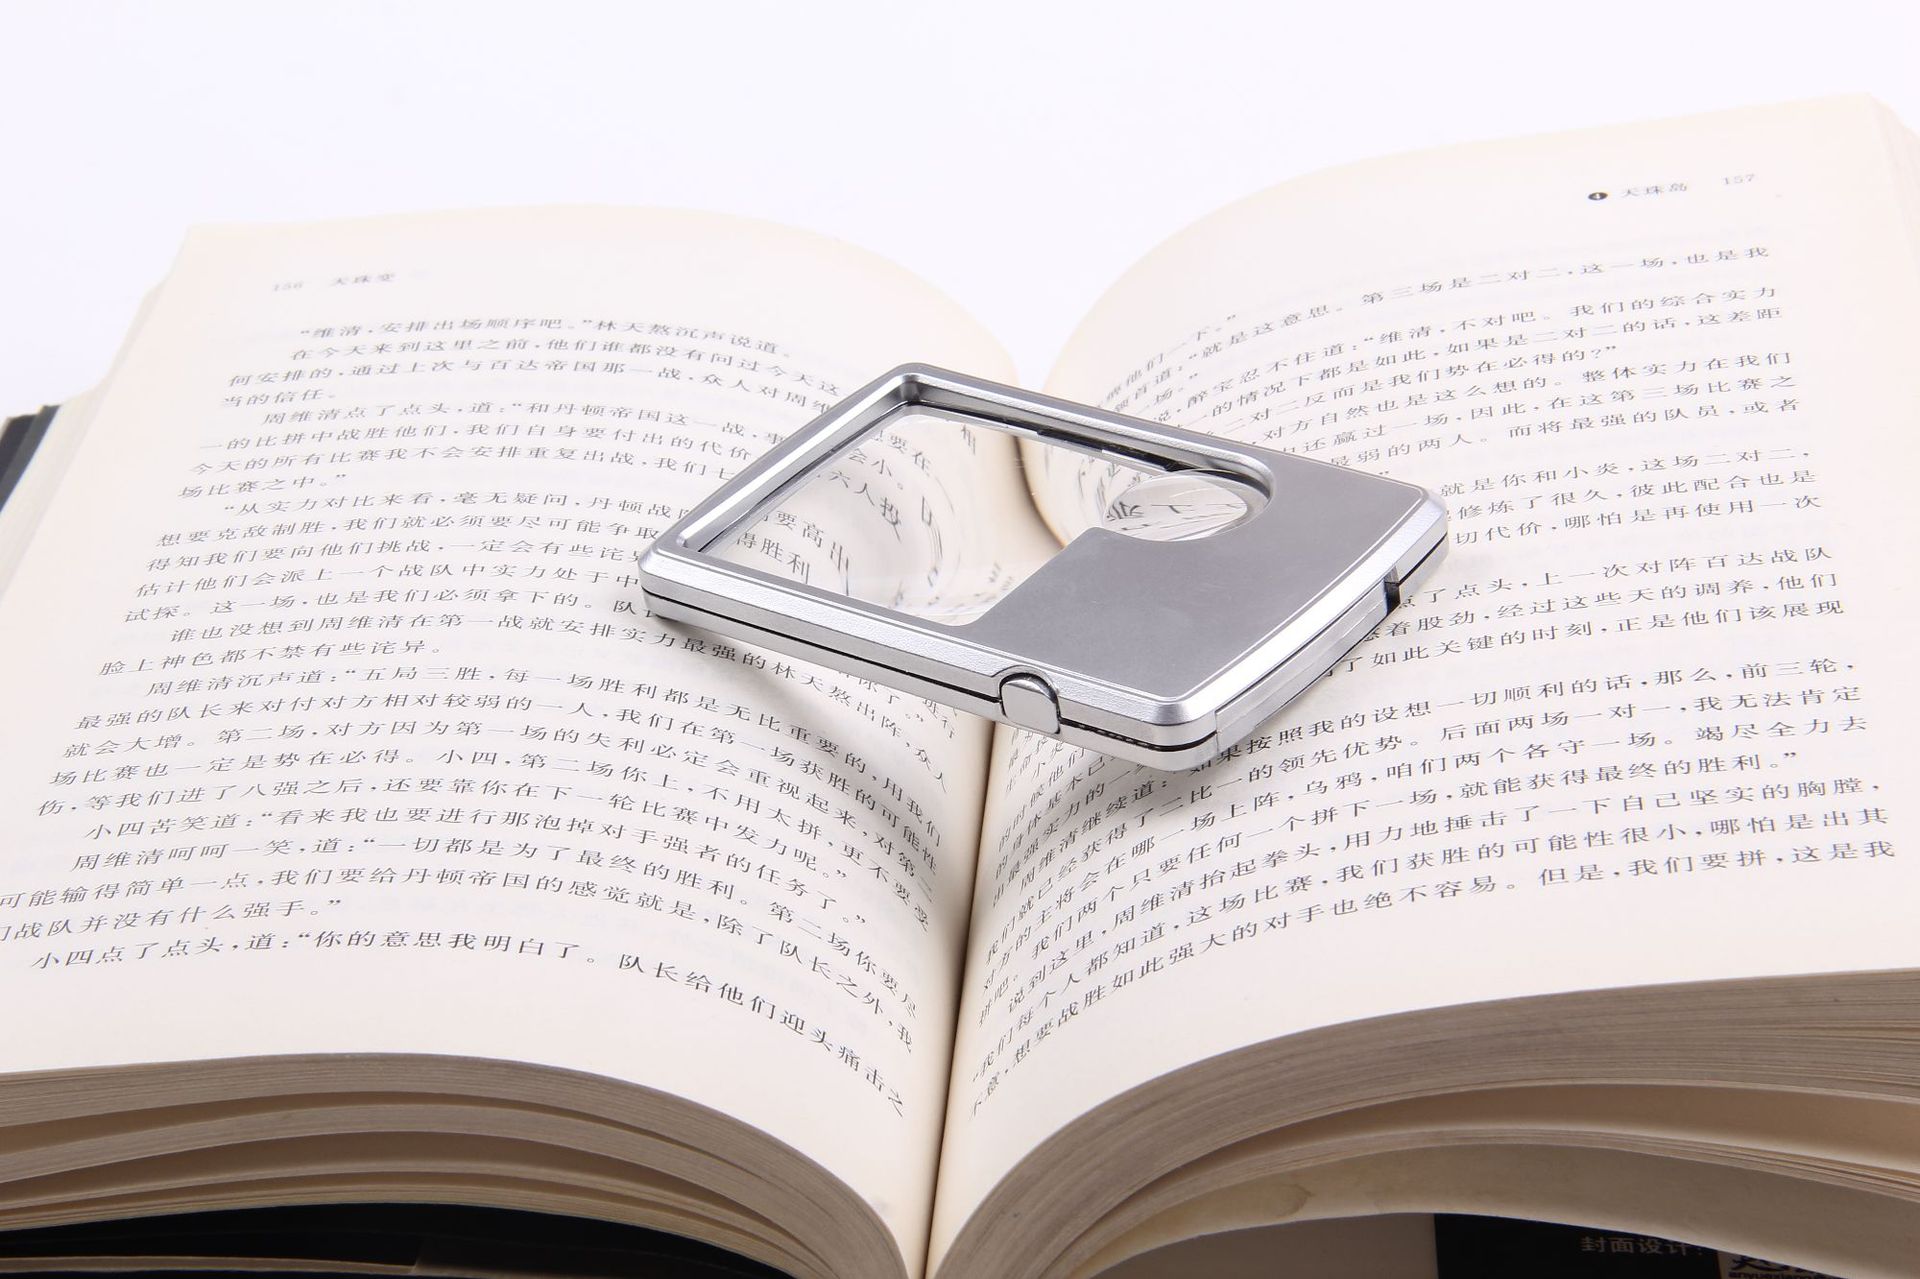 LED card type square portable acrylic lens reading Magnifier - Click Image to Close